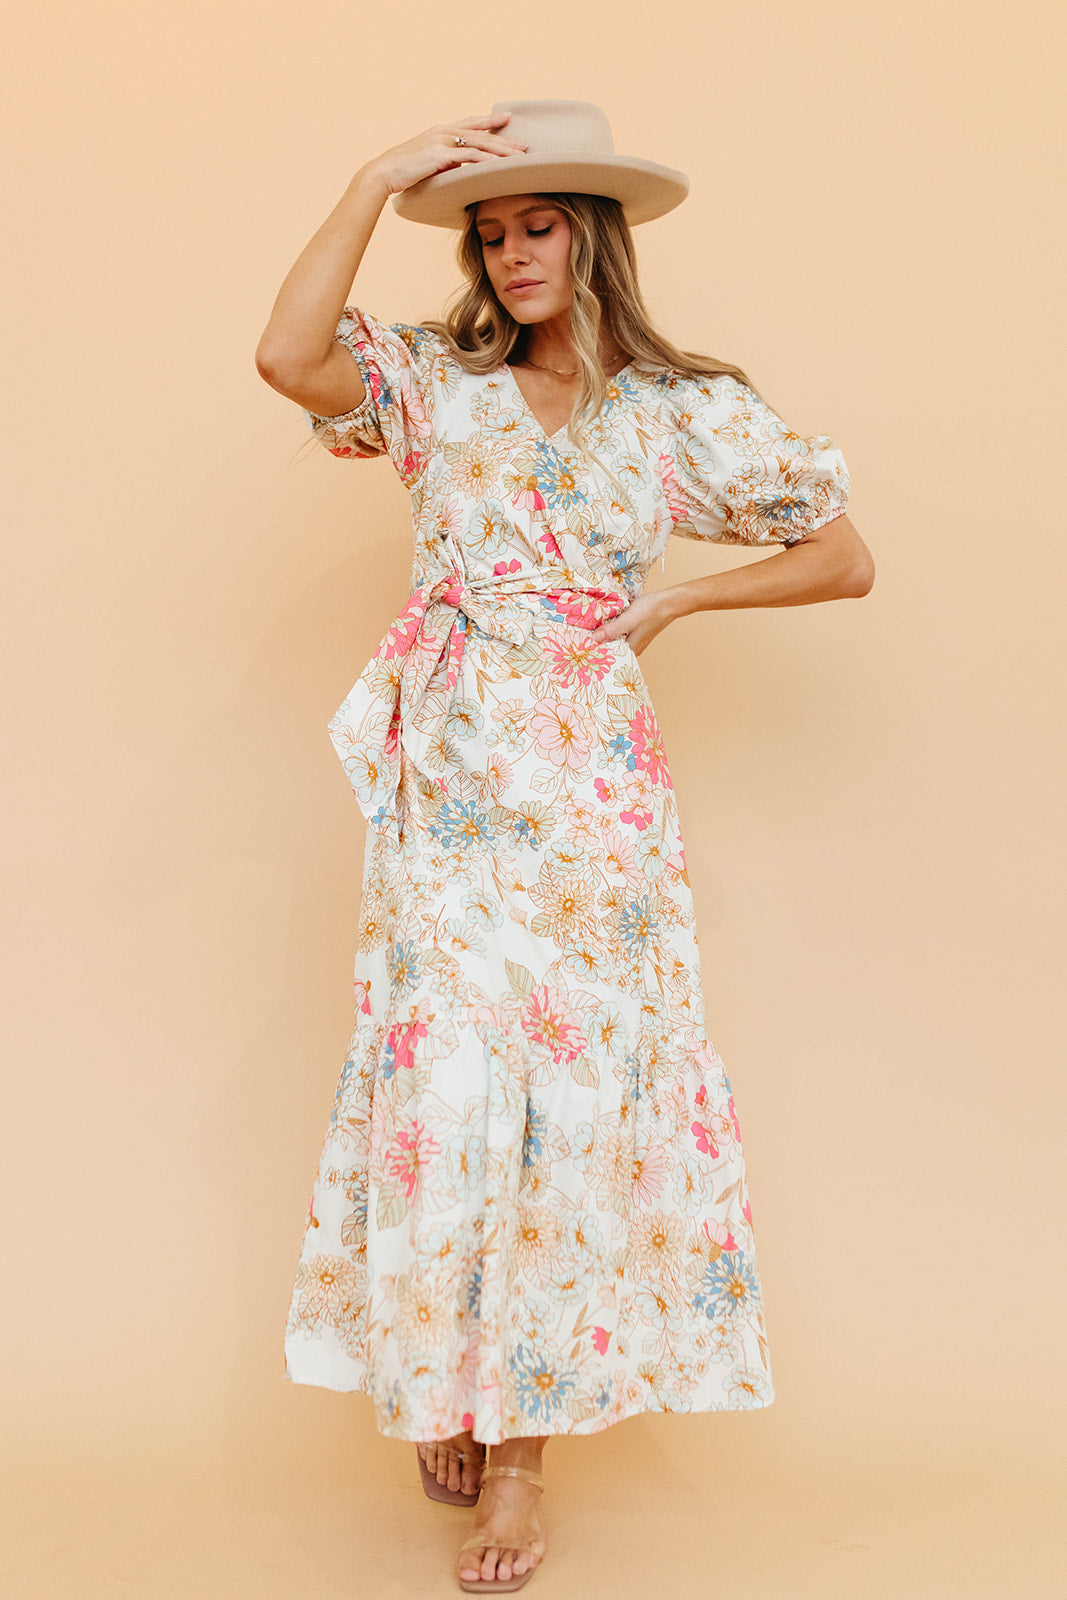 THE NIA WRAP TOP DRESS IN IVORY FLORAL